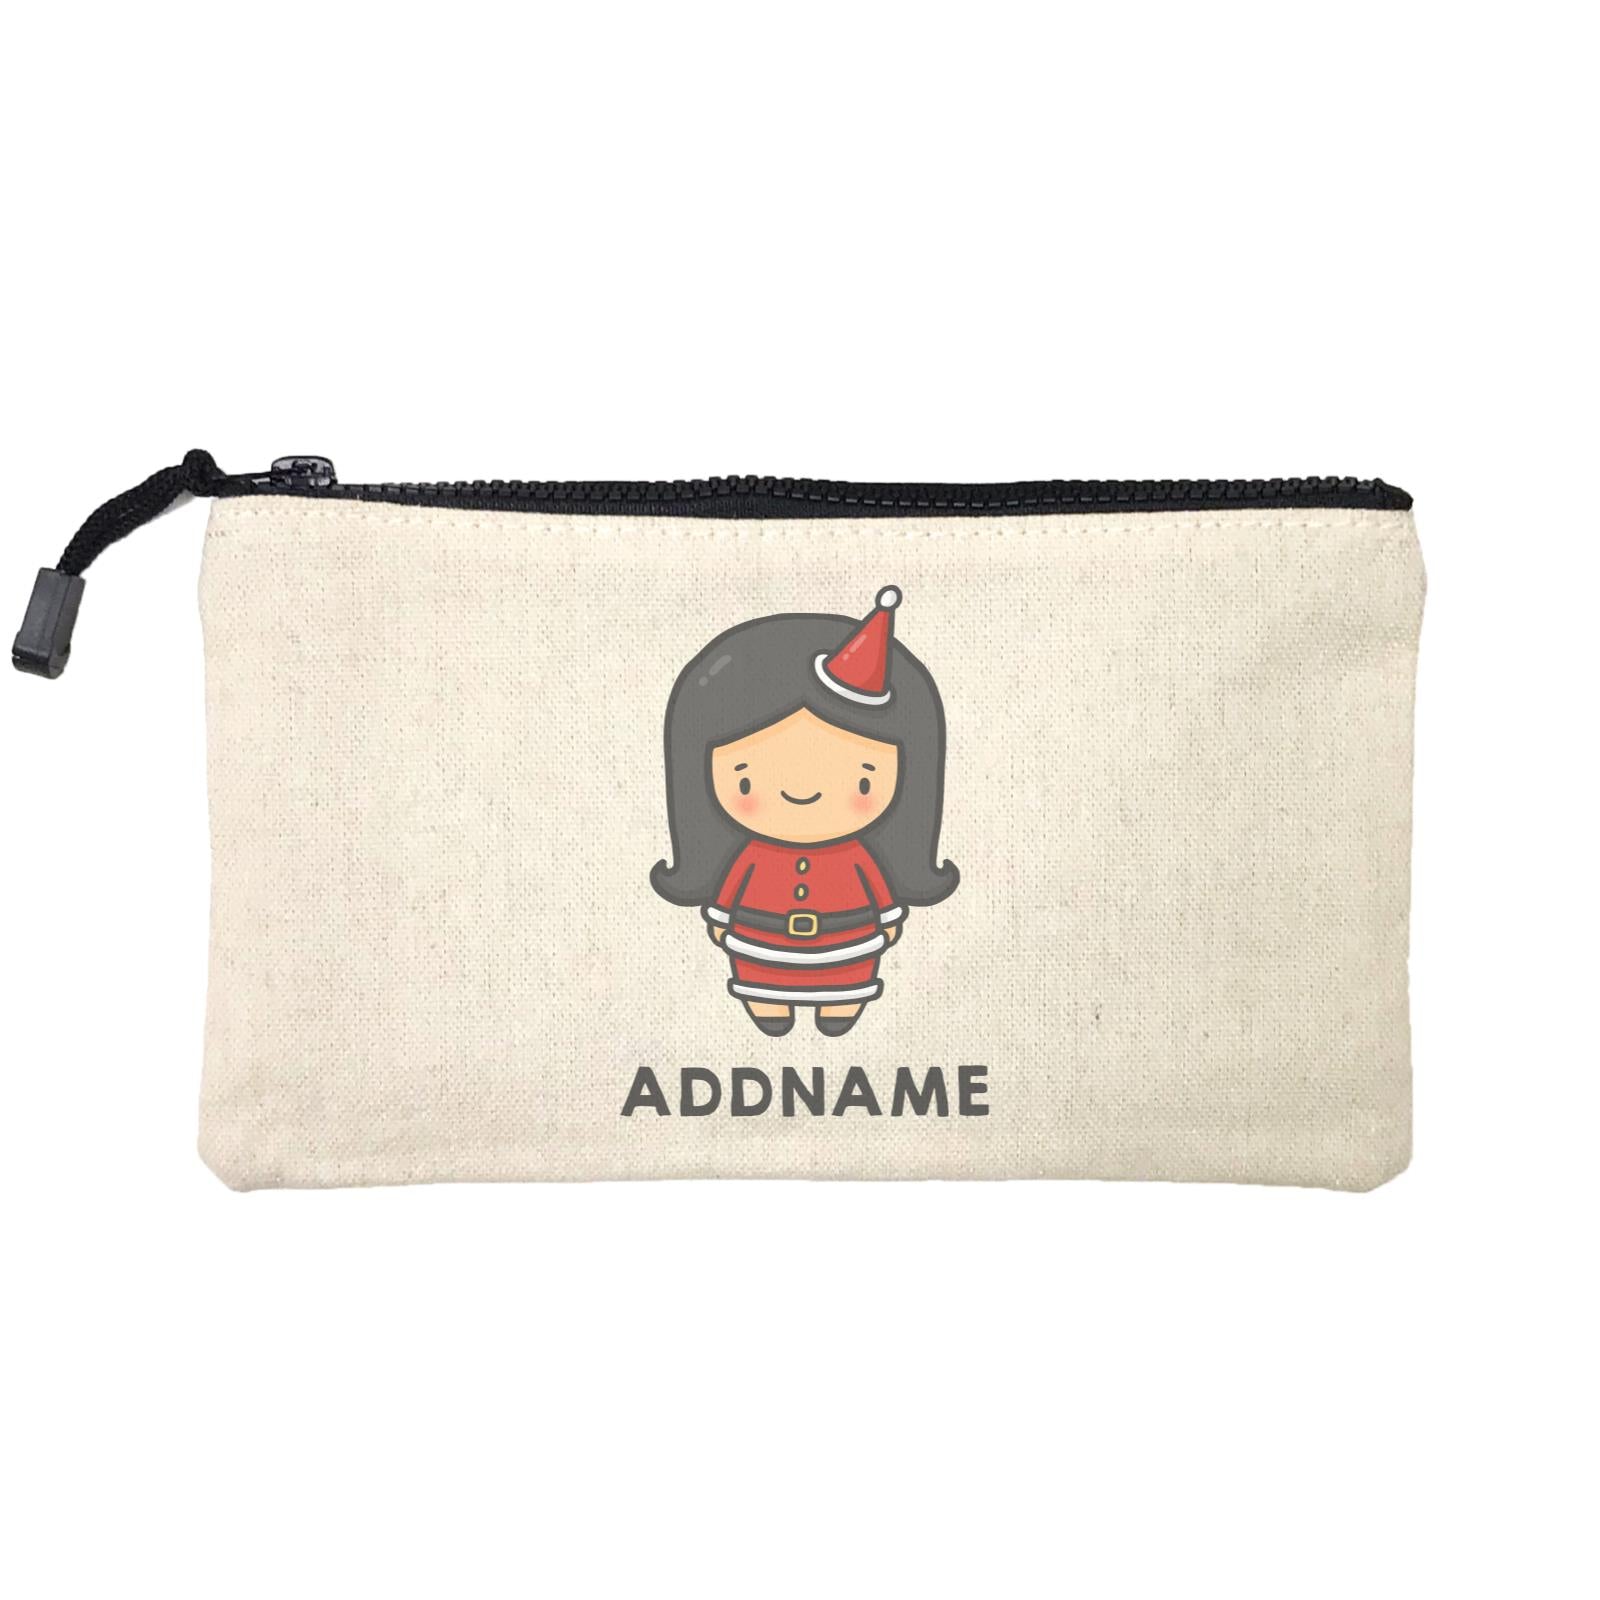 Xmas Cute Girl Addname Mini Accessories Stationery Pouch